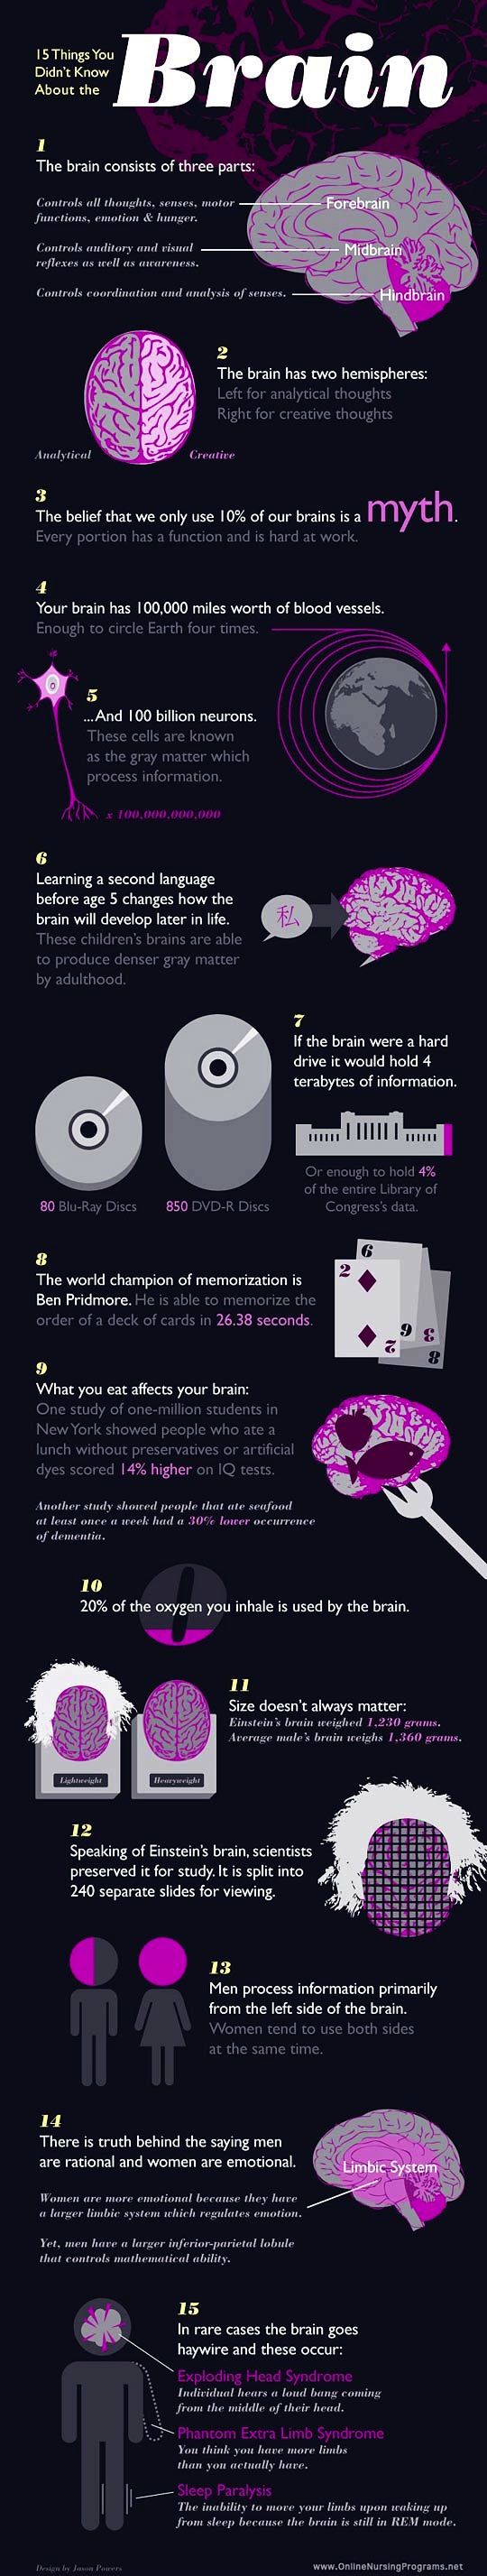 15 Things You Didn't Know About the Brain.